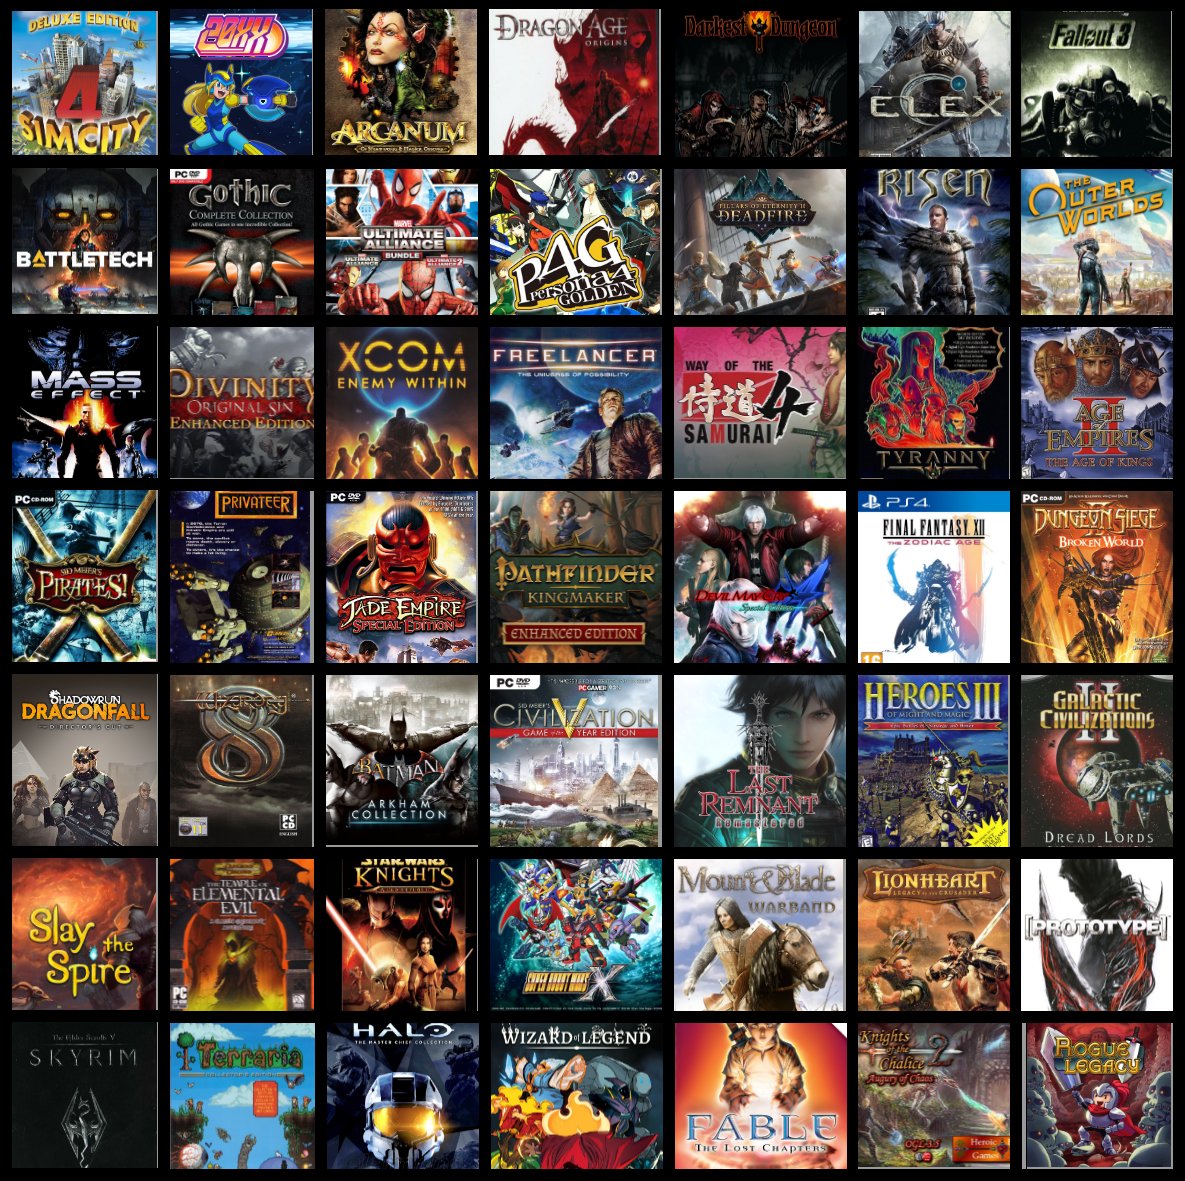 16) Top 49 PC games(disclaimer: ok, used a PS4 image of XII there, but i chose to put it here due to mods allowing you to use custom made boards or create your own sets.)